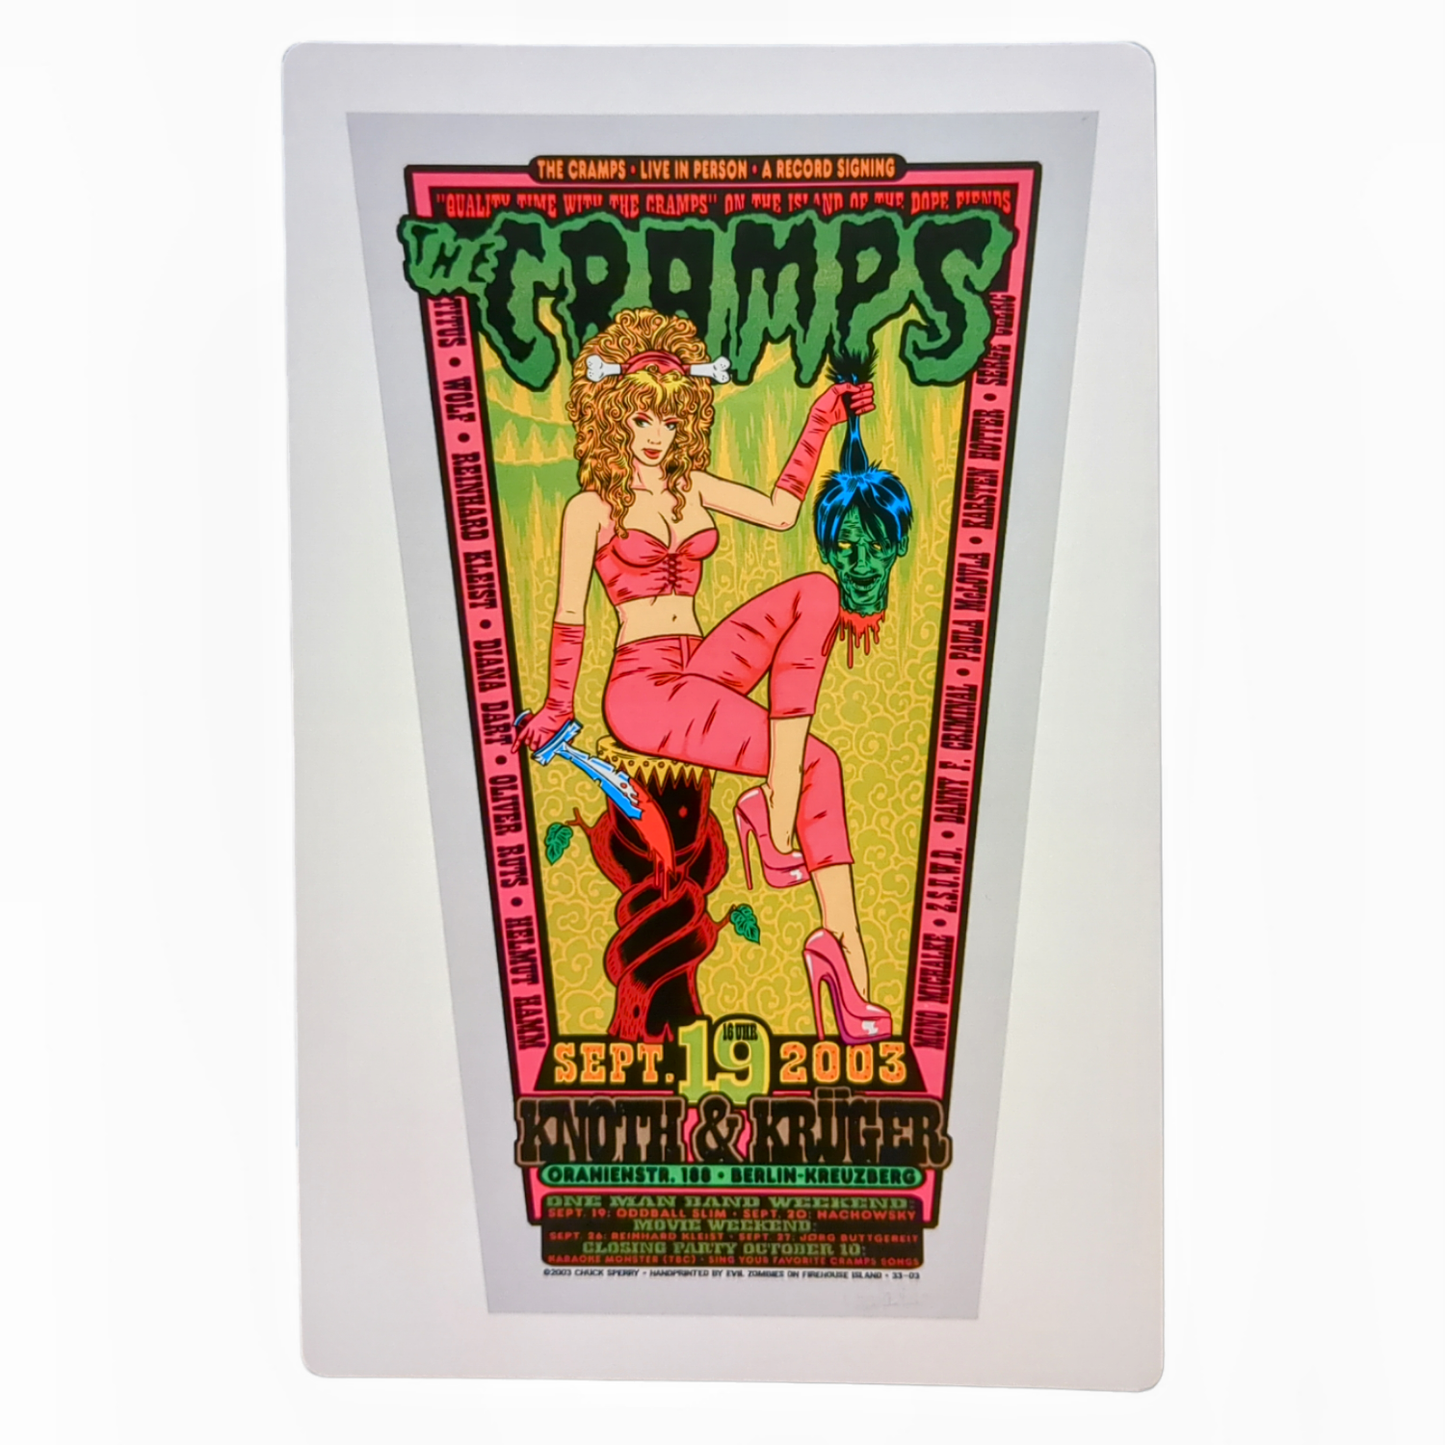 Chuck Sperry The Cramps Knoth & Krüger Berlin, Germany 2003 Art Card Approx. 8.5 x 5.5 in